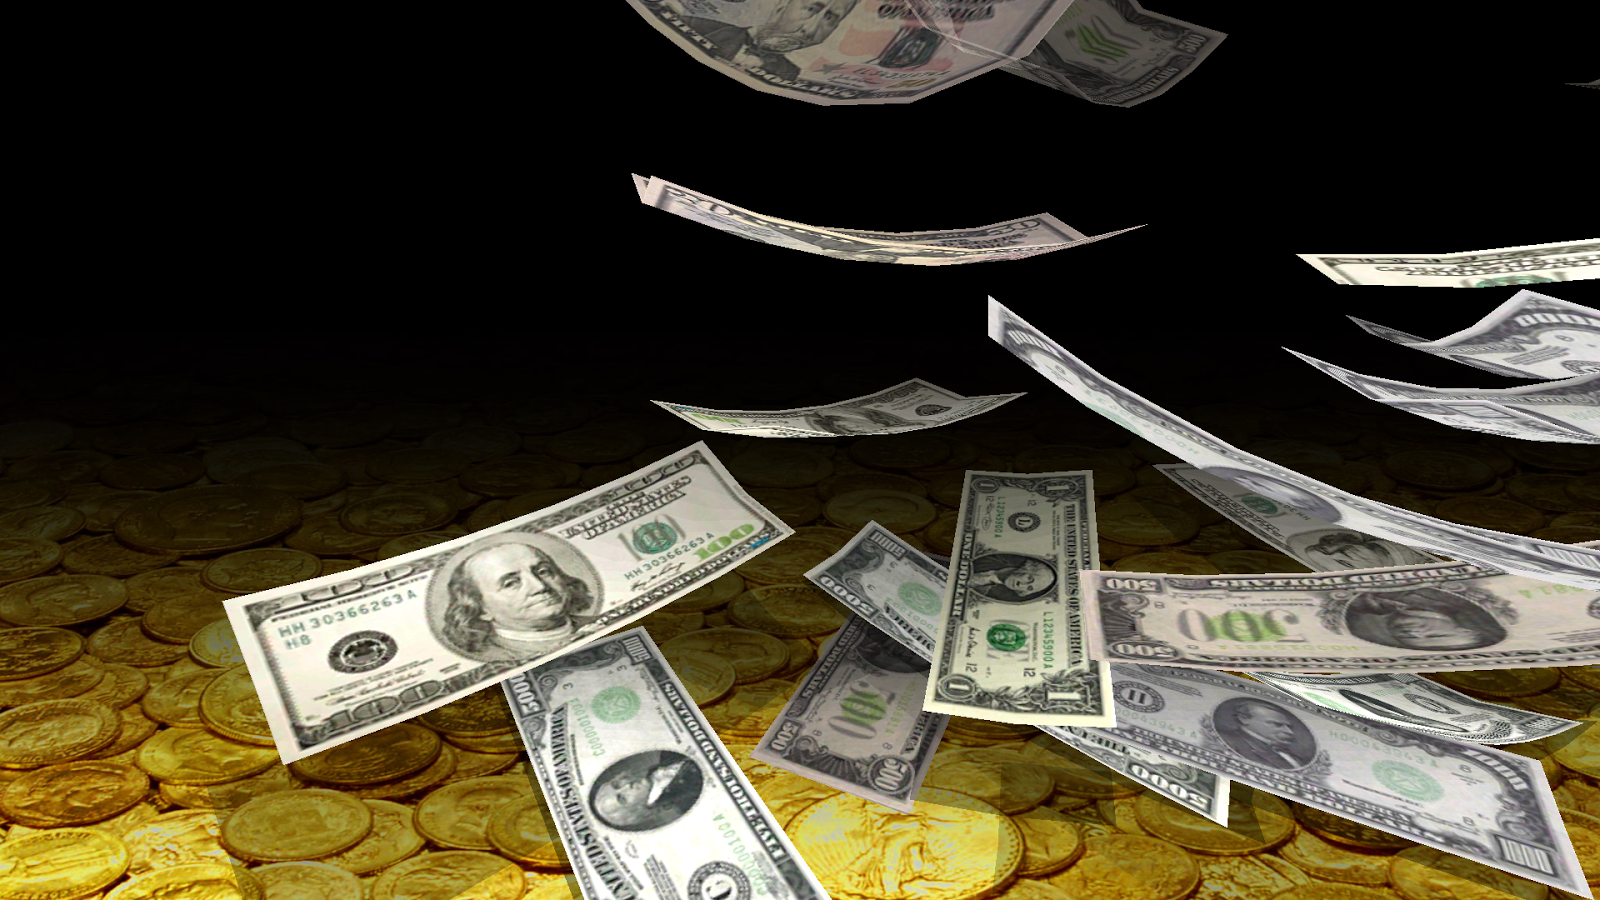 Falling Money 3d Wallpaper Android Apps On Google Play